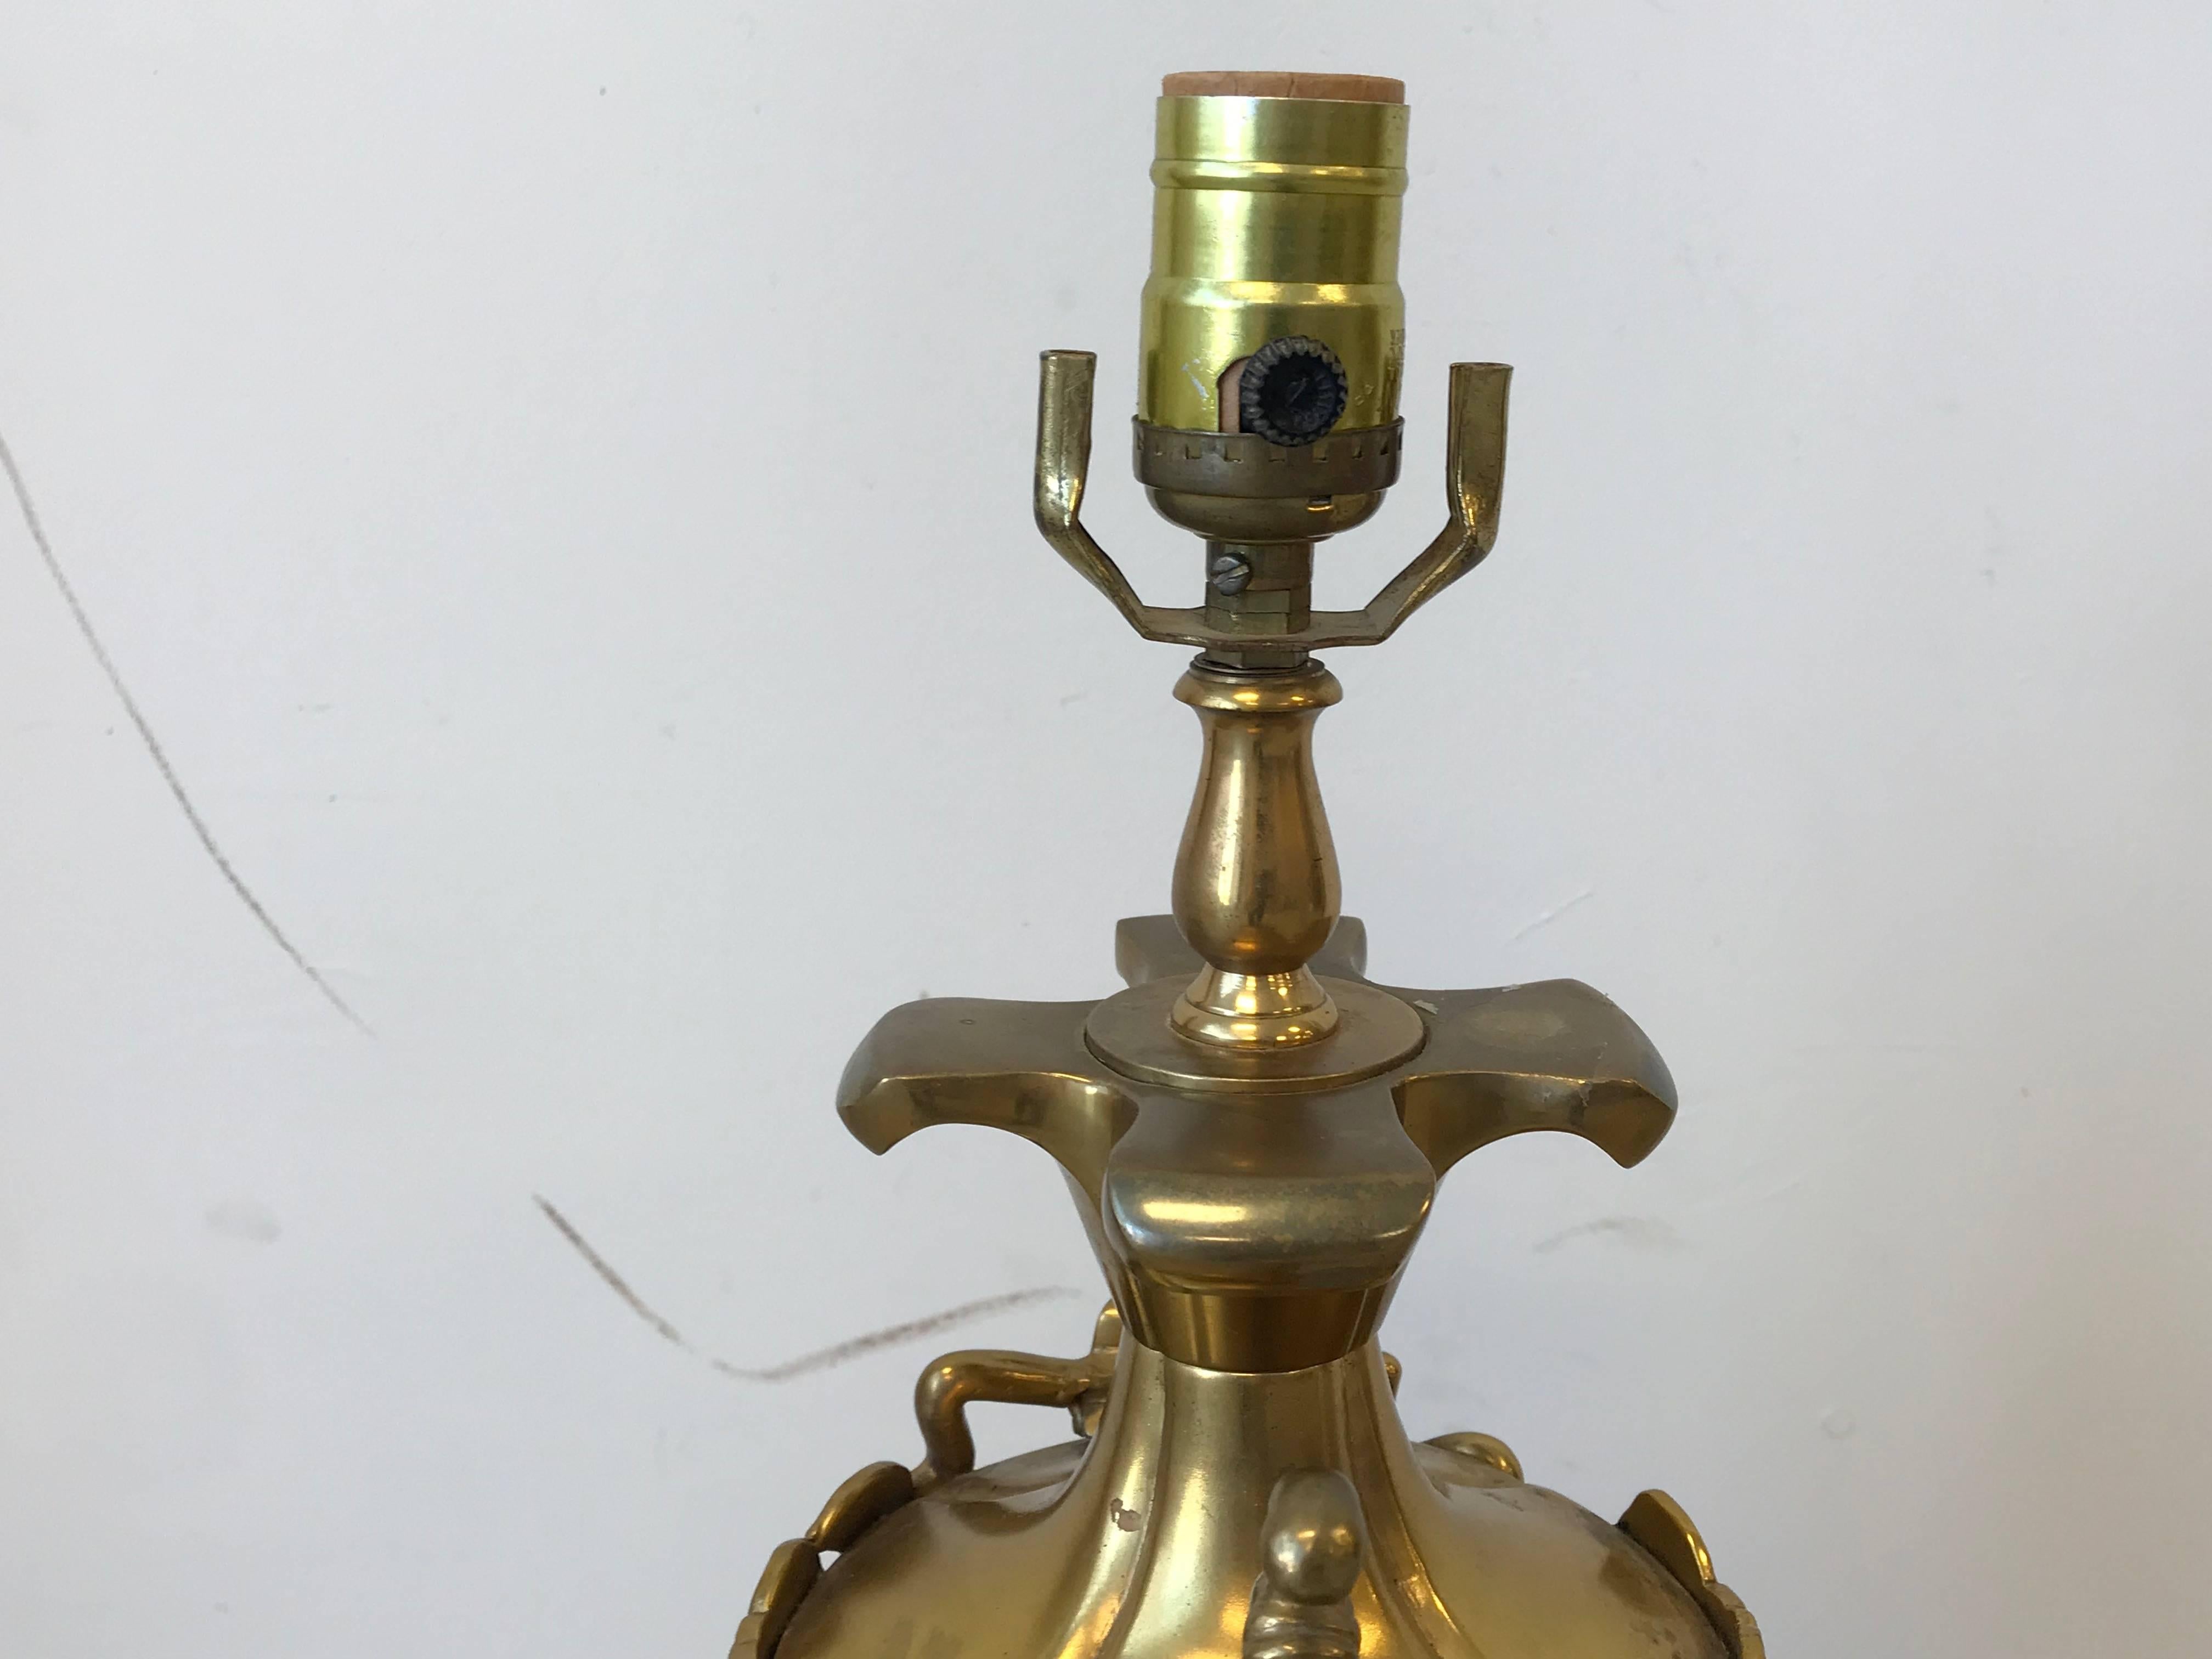 Offered is a stunning, 1960s, Italian brass Bacchus sculptural urn lamp. The brass urn piece is mounted on a decorative wood base. Heavy. Wired for standard US use.